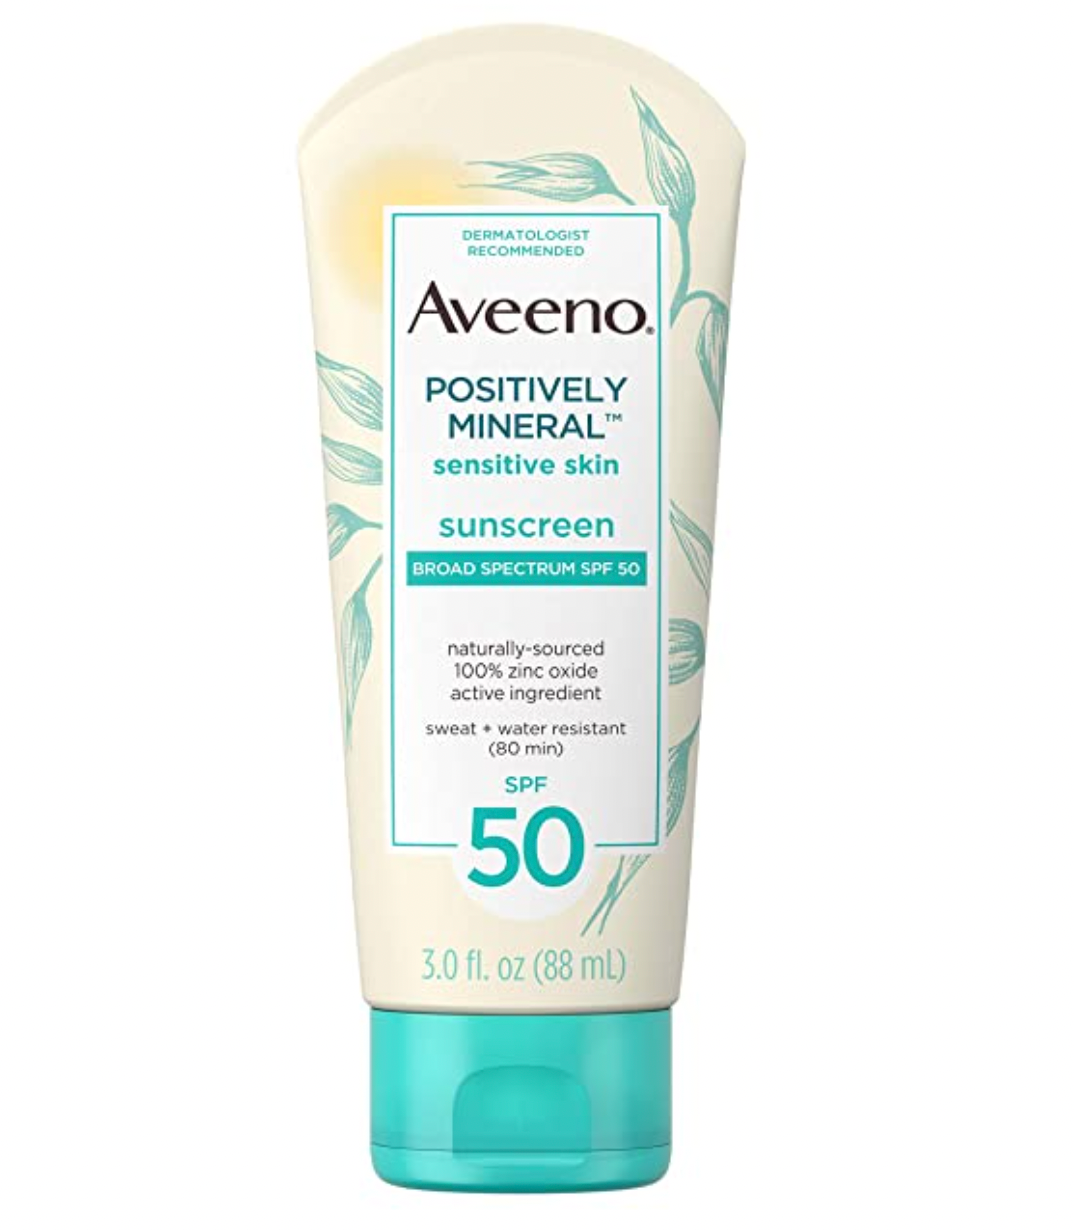 Aveeno Positively Mineral Sensitive Skin Daily Sunscreen Lotion